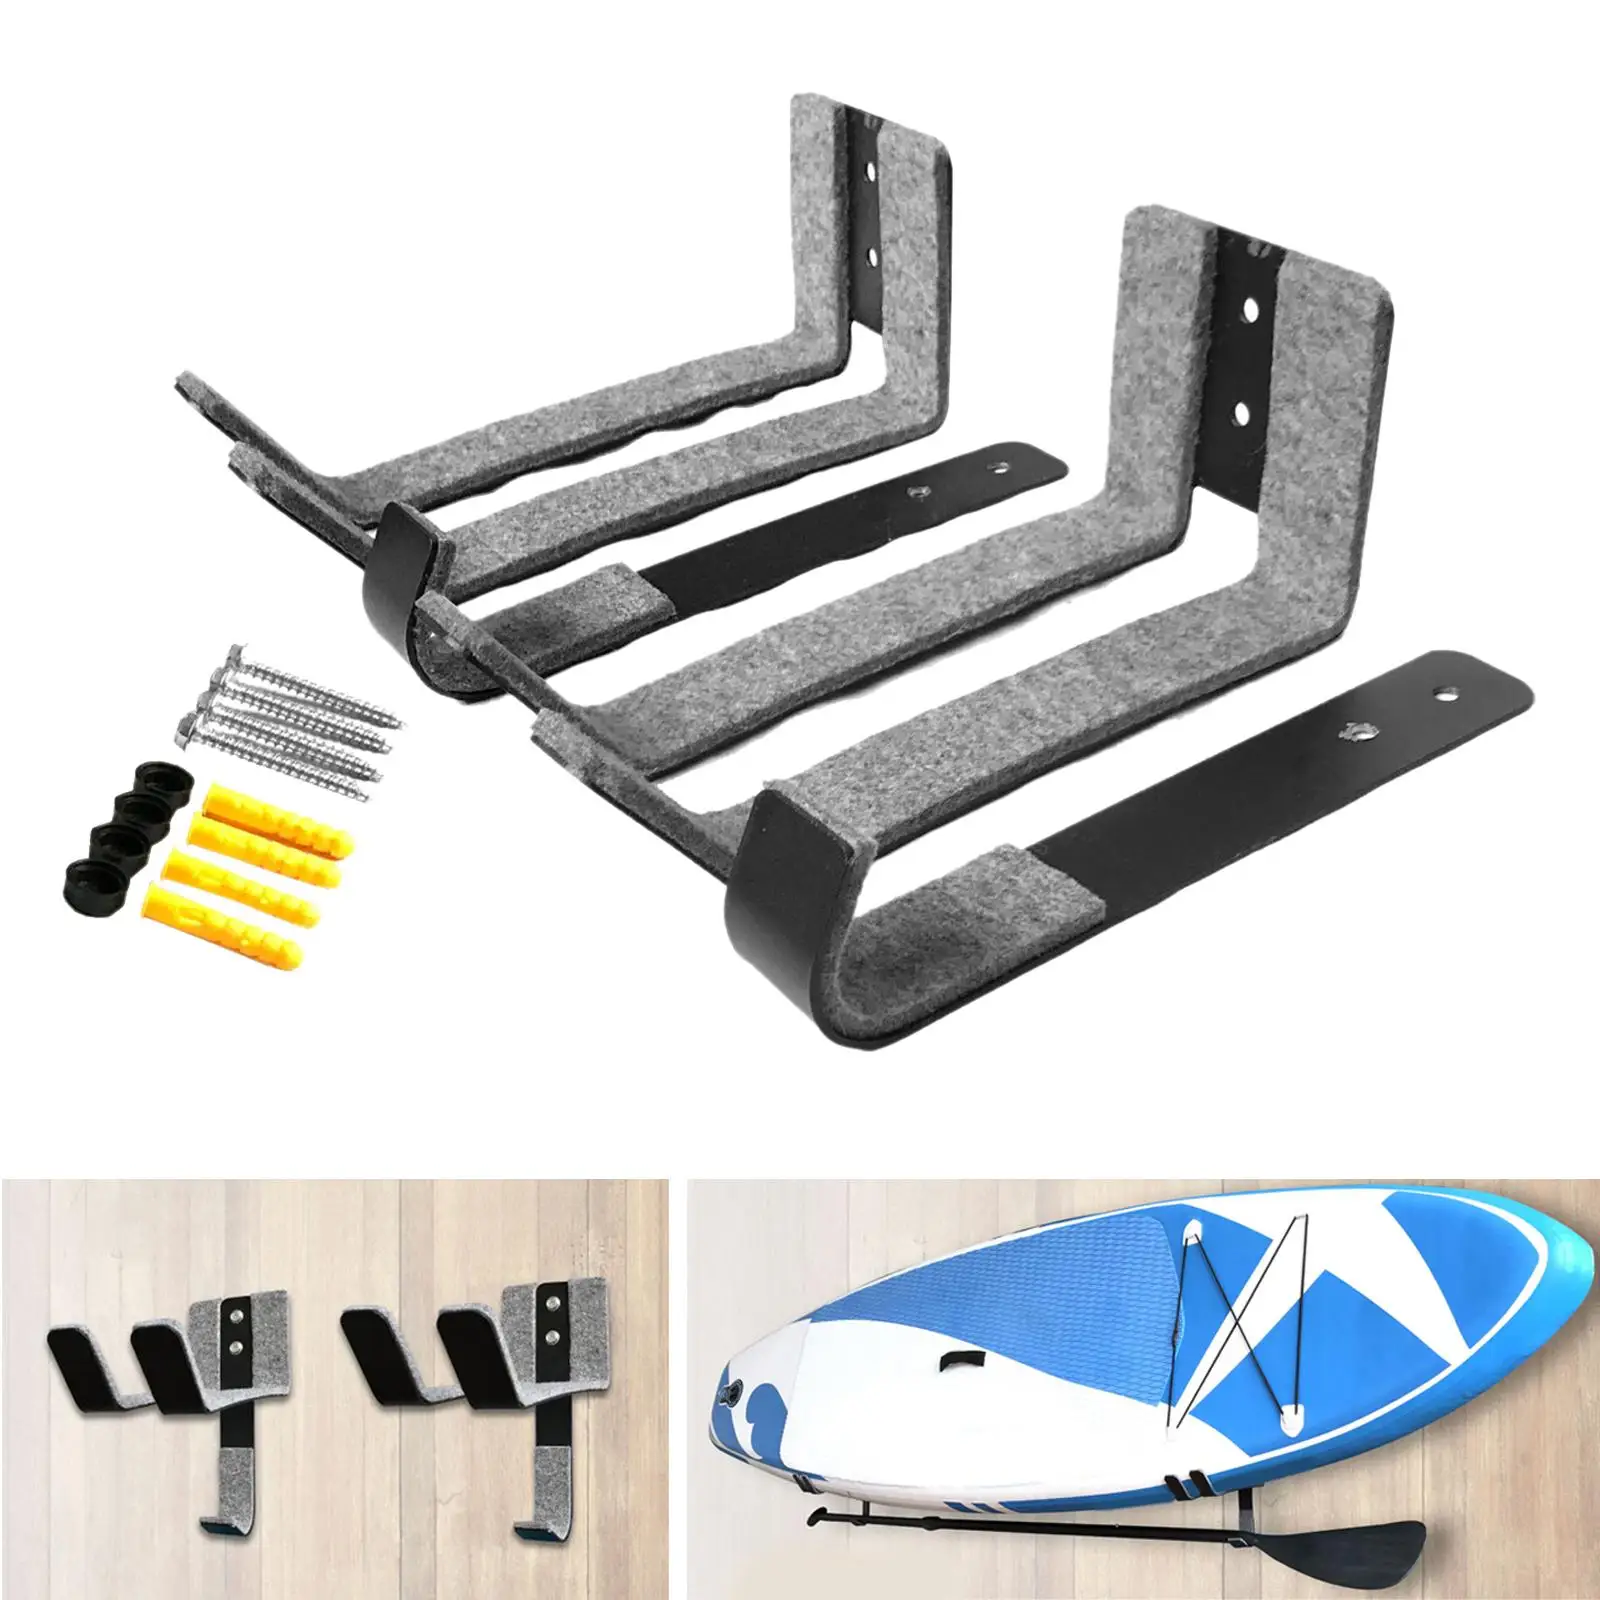 Aluminum Surf Board Rack Surfboard Storage Supplies Holds Both Long Boards and